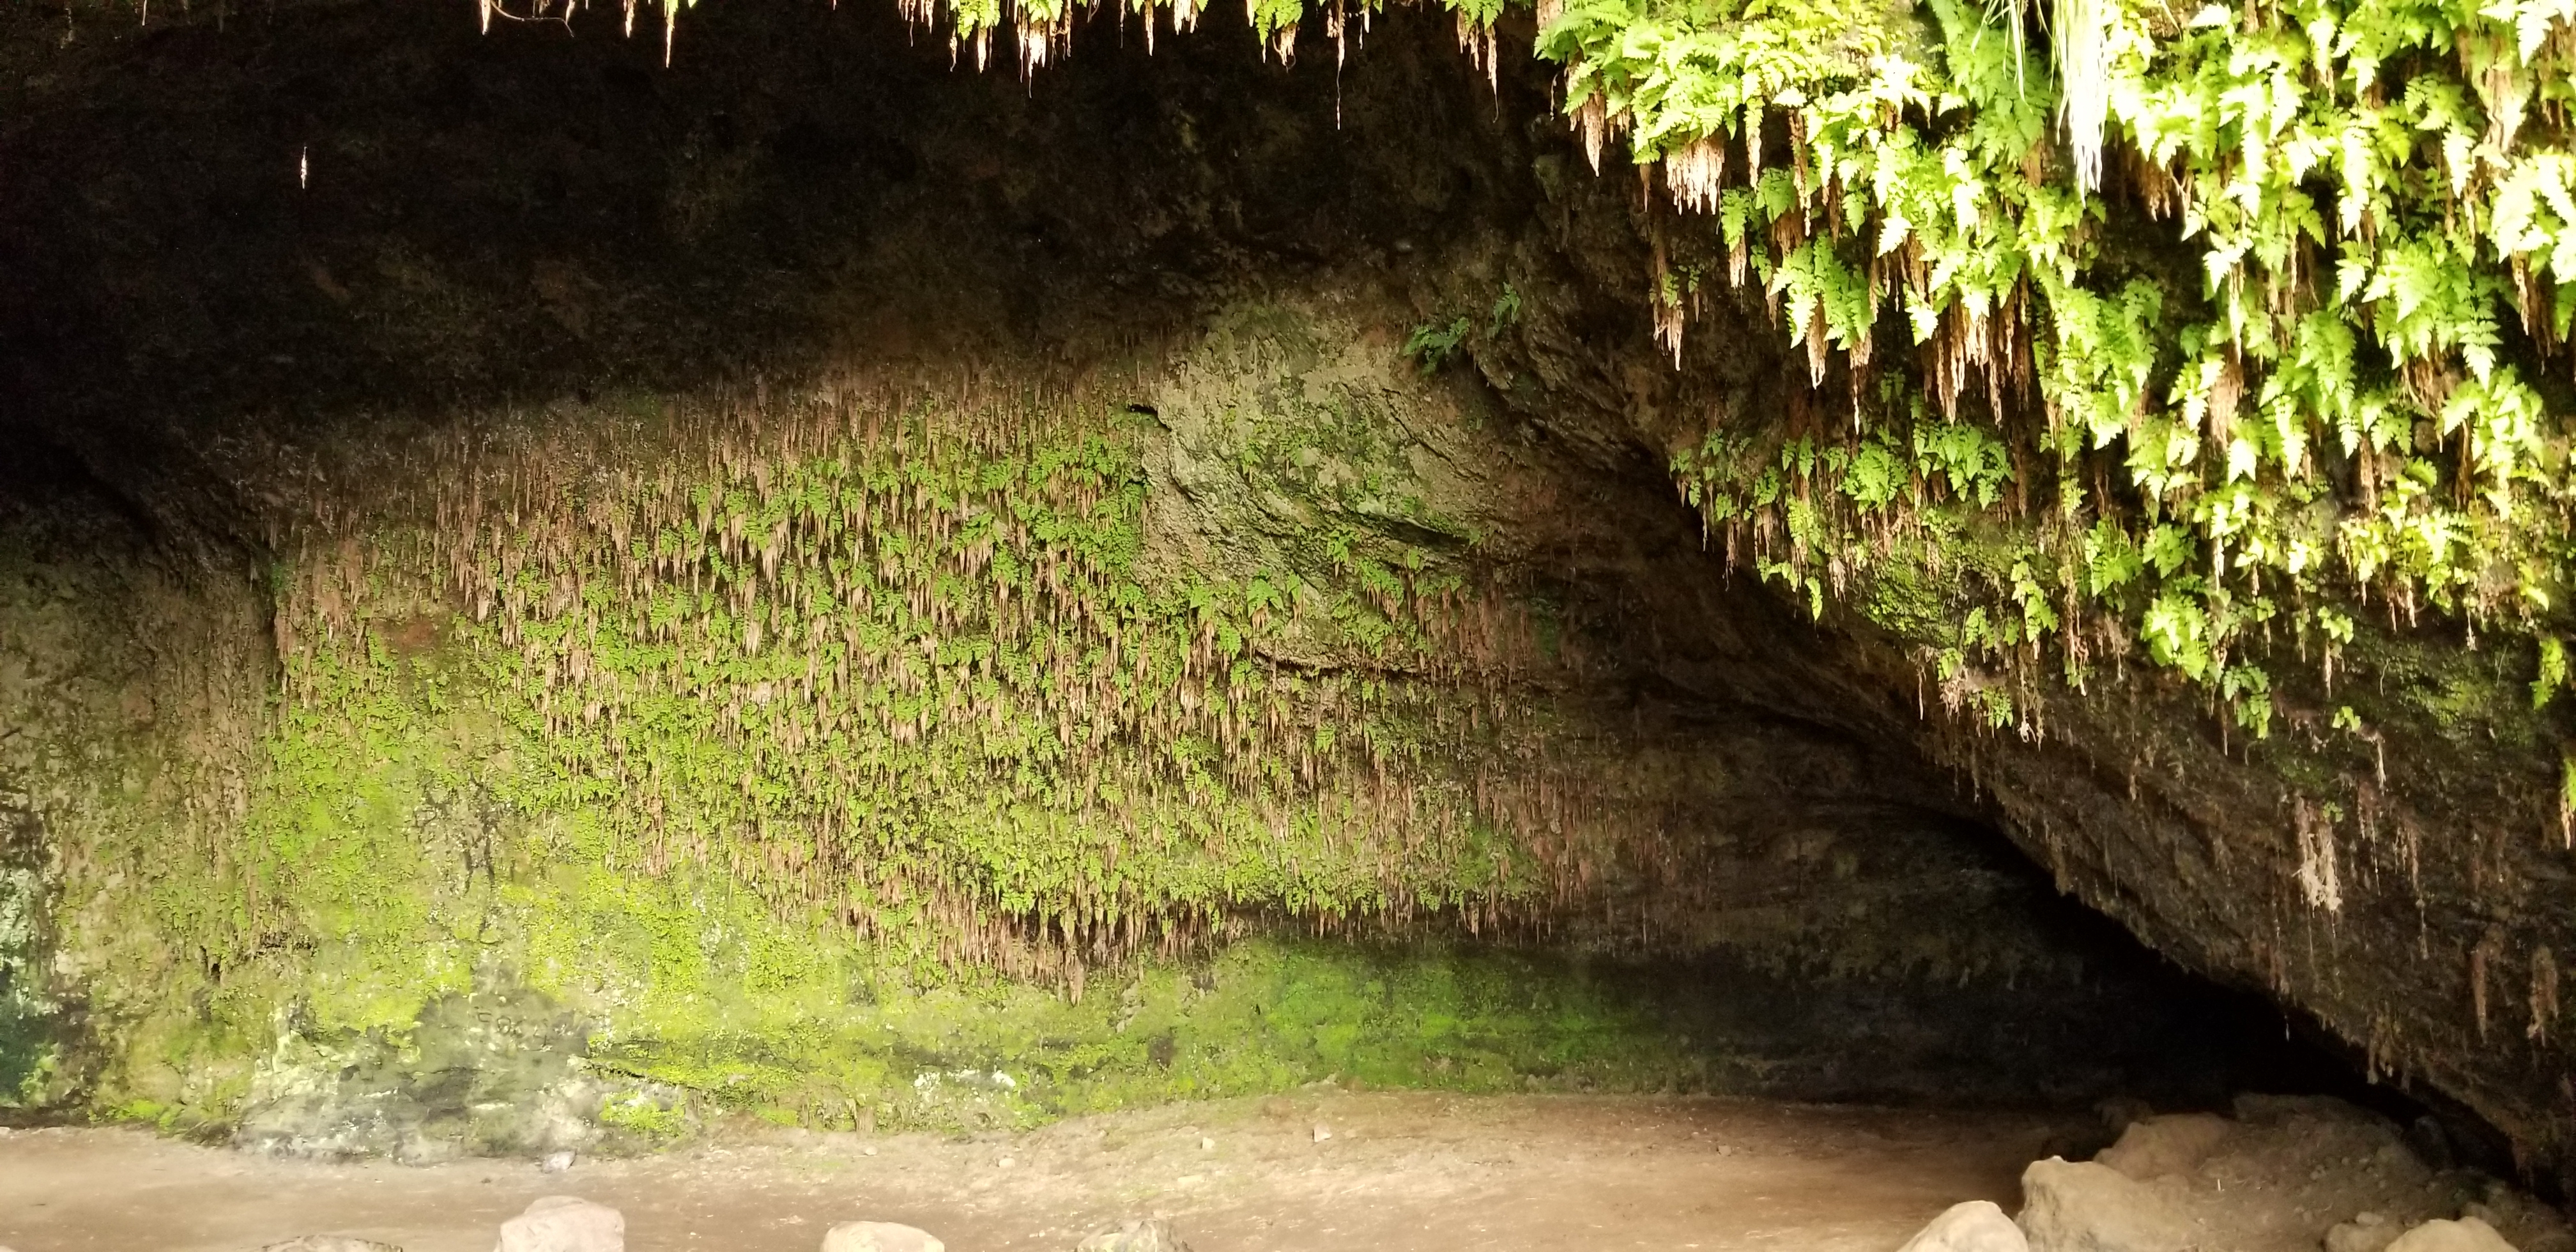 A view of the ferns inside the Steinahellir Cave